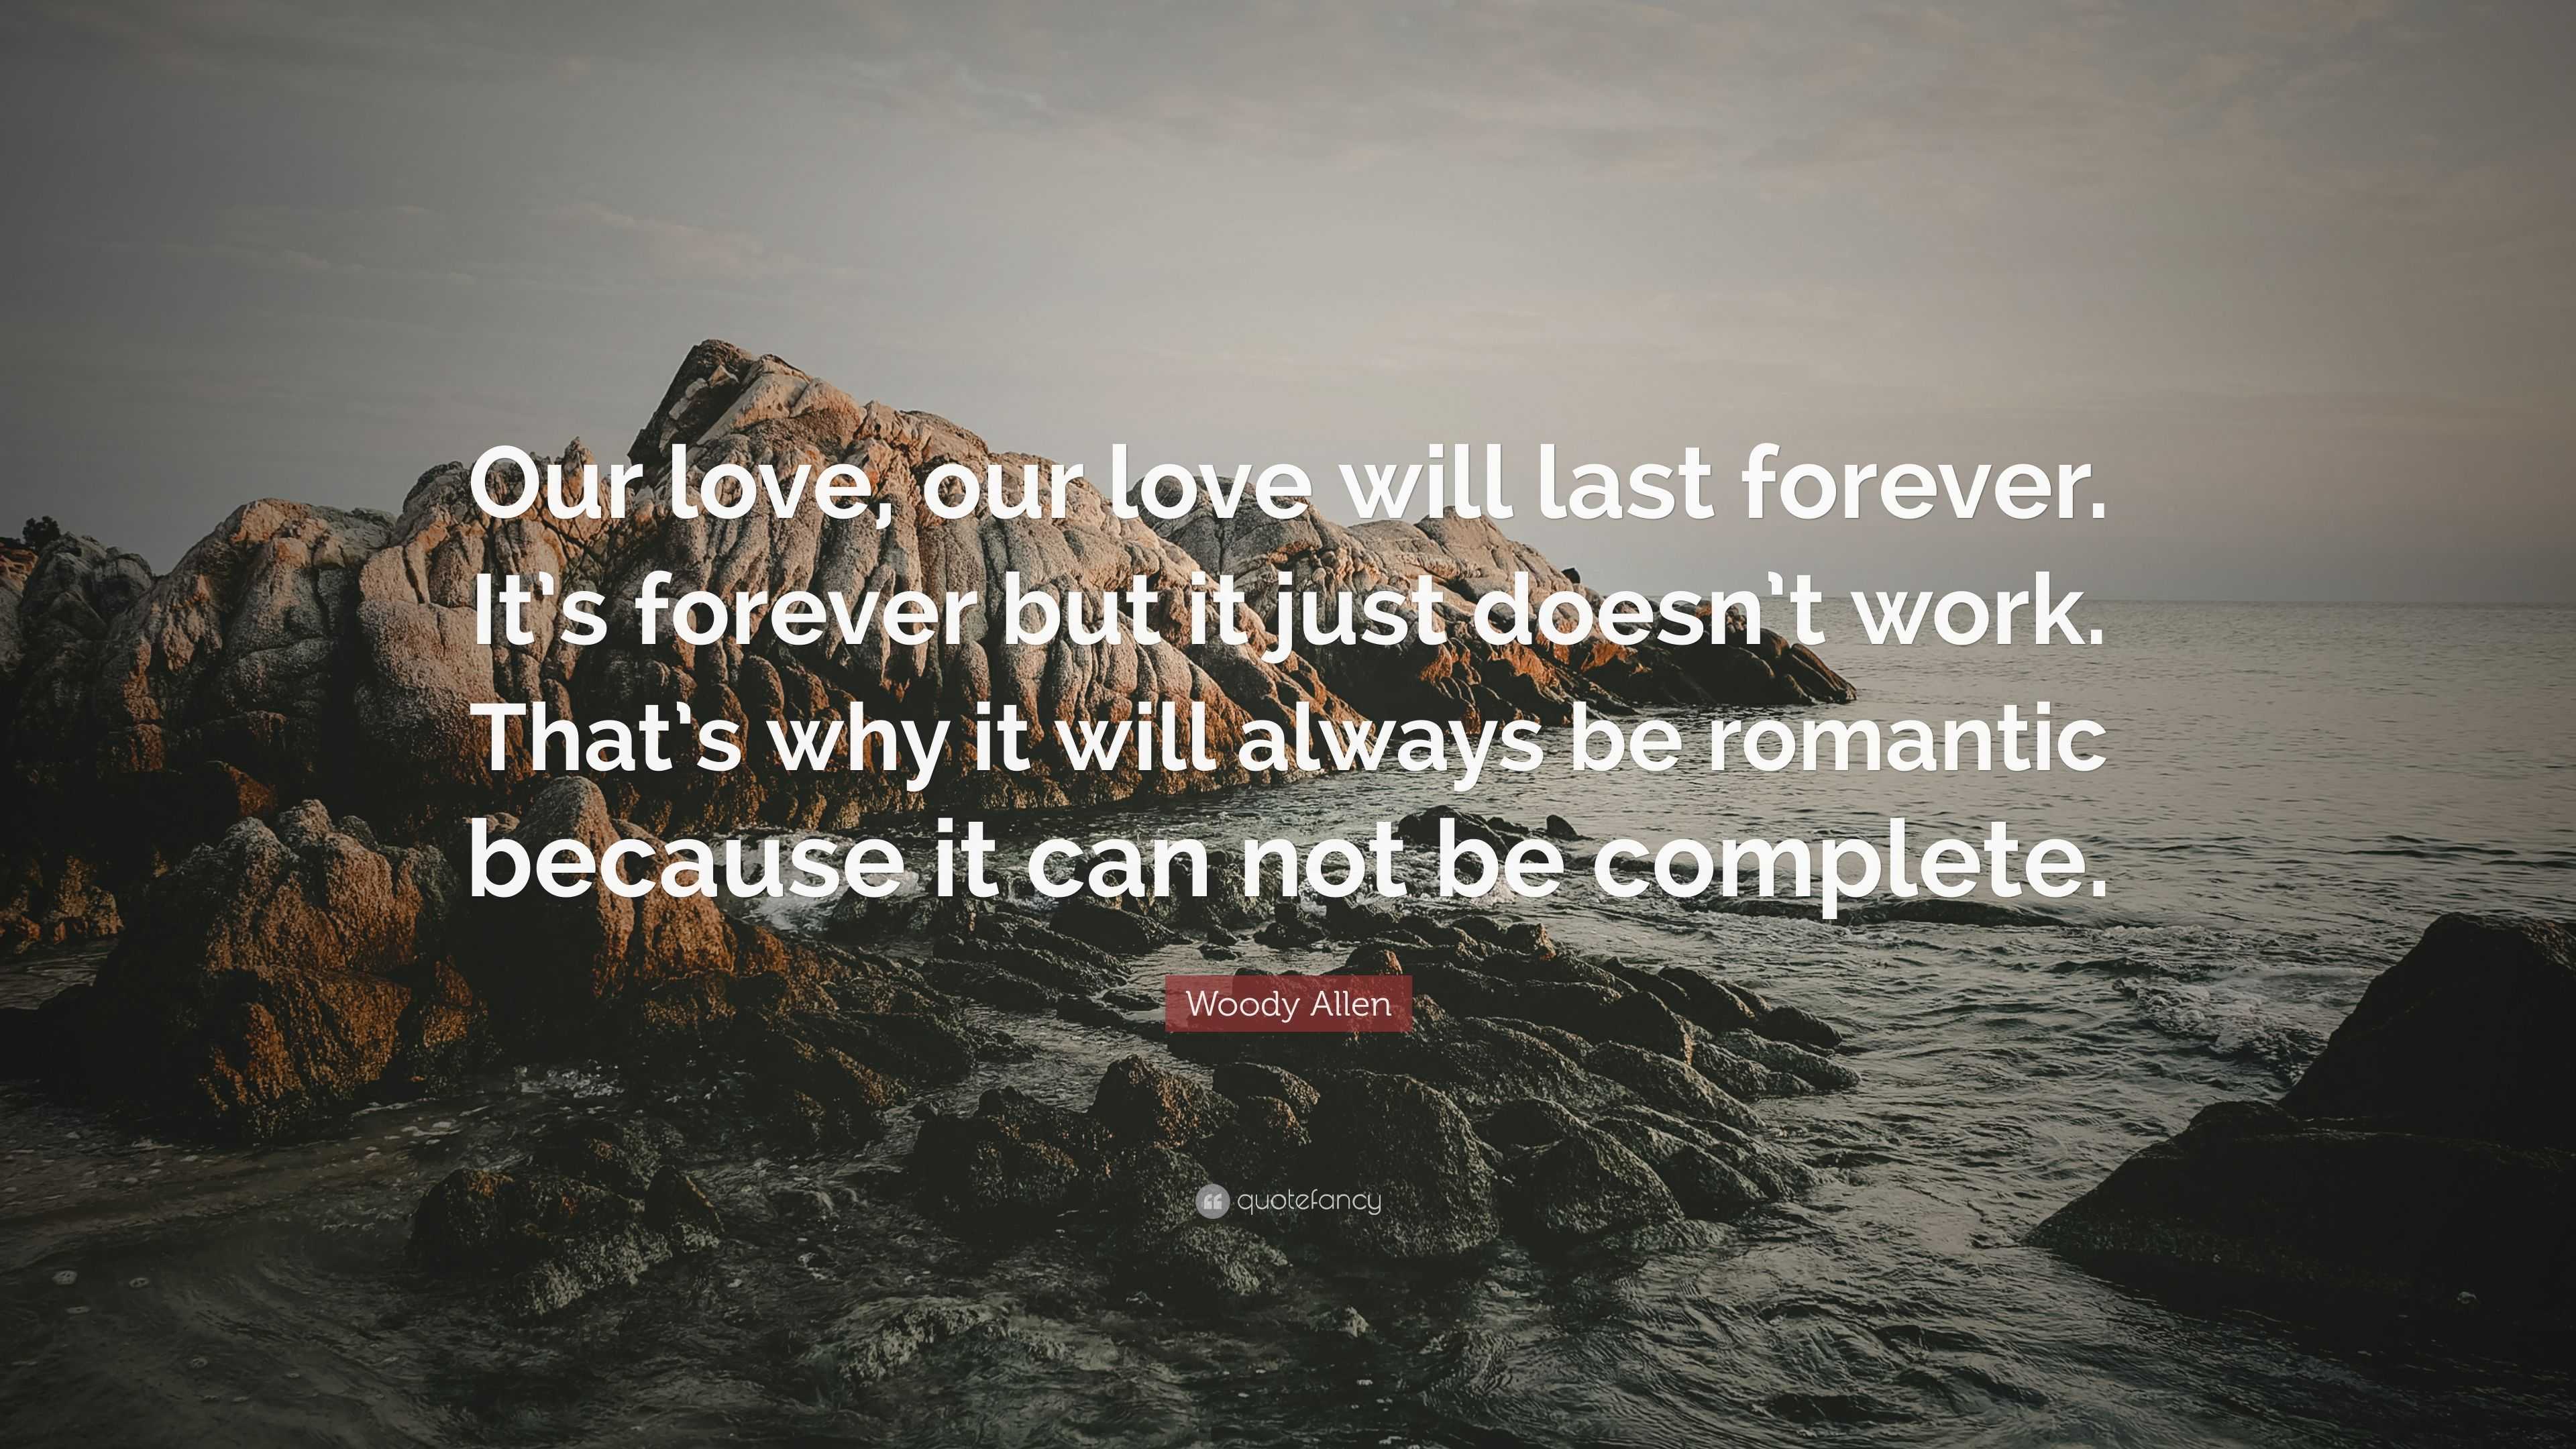 Woody Allen Quote “Our love our love will last forever It s forever